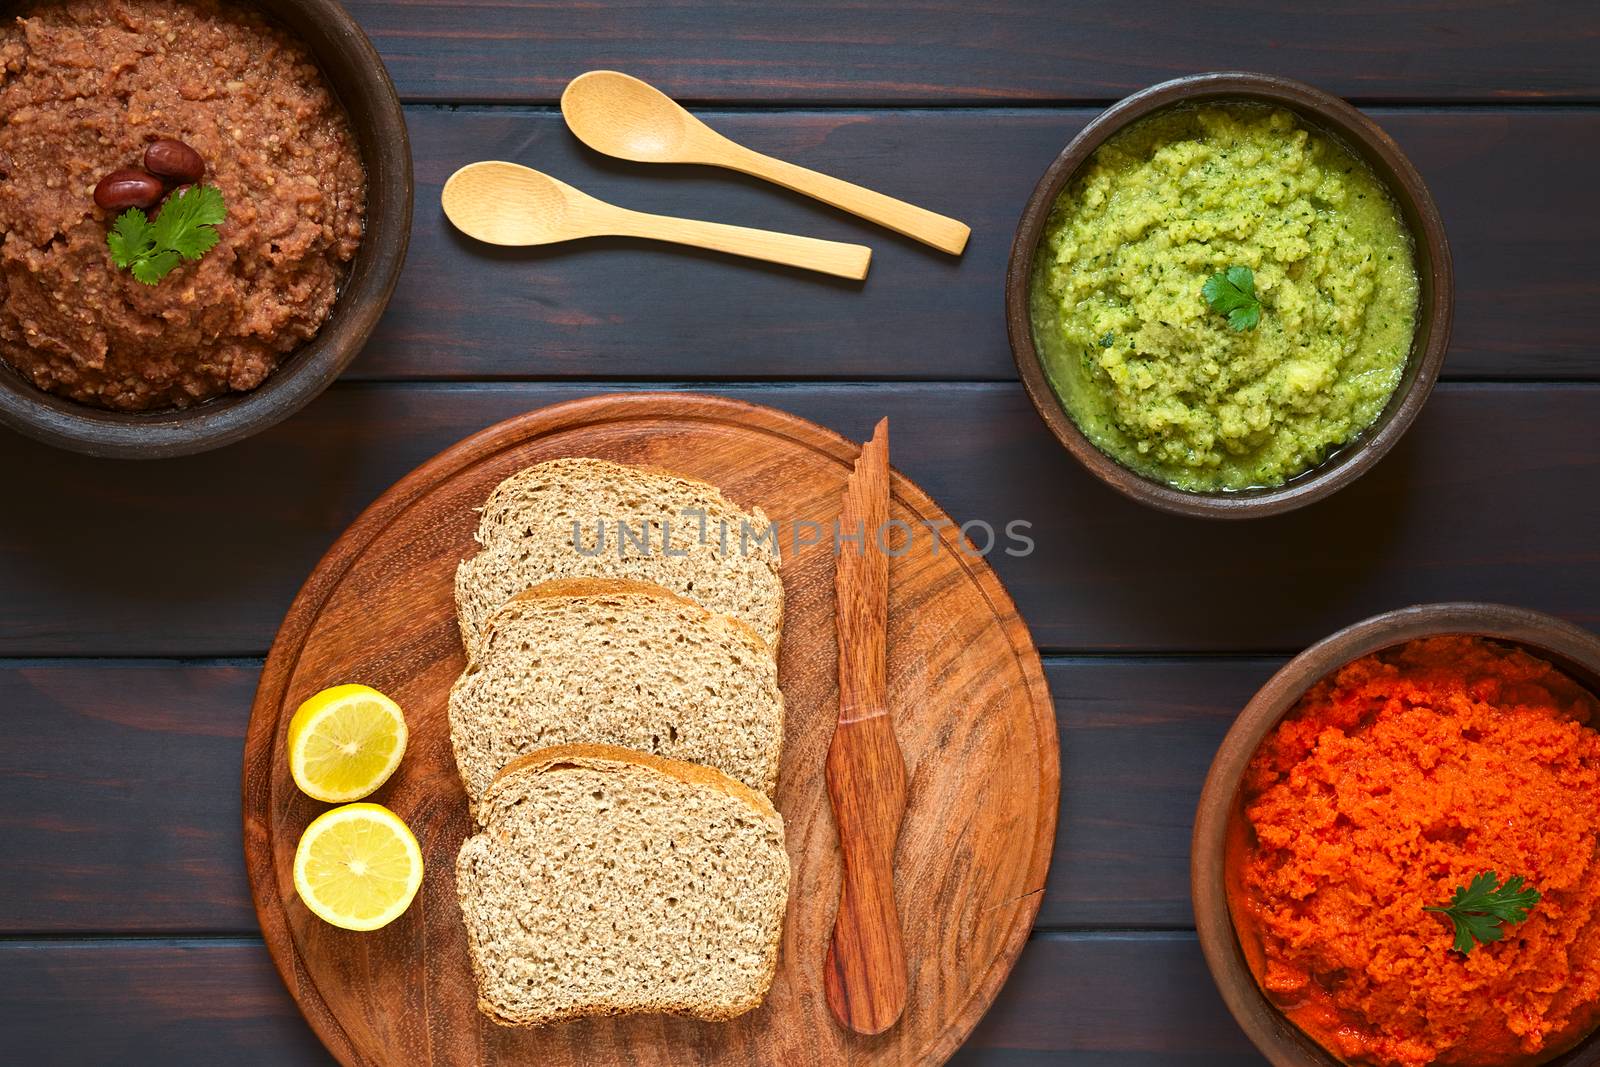 Overhead shot of wholegrain bread slices on wooden plate with three rustic bowls of homemade vegetable spreads (red kidney bean, zucchini and parsley, carrot and red bell pepper), photographed on dark wood with natural light